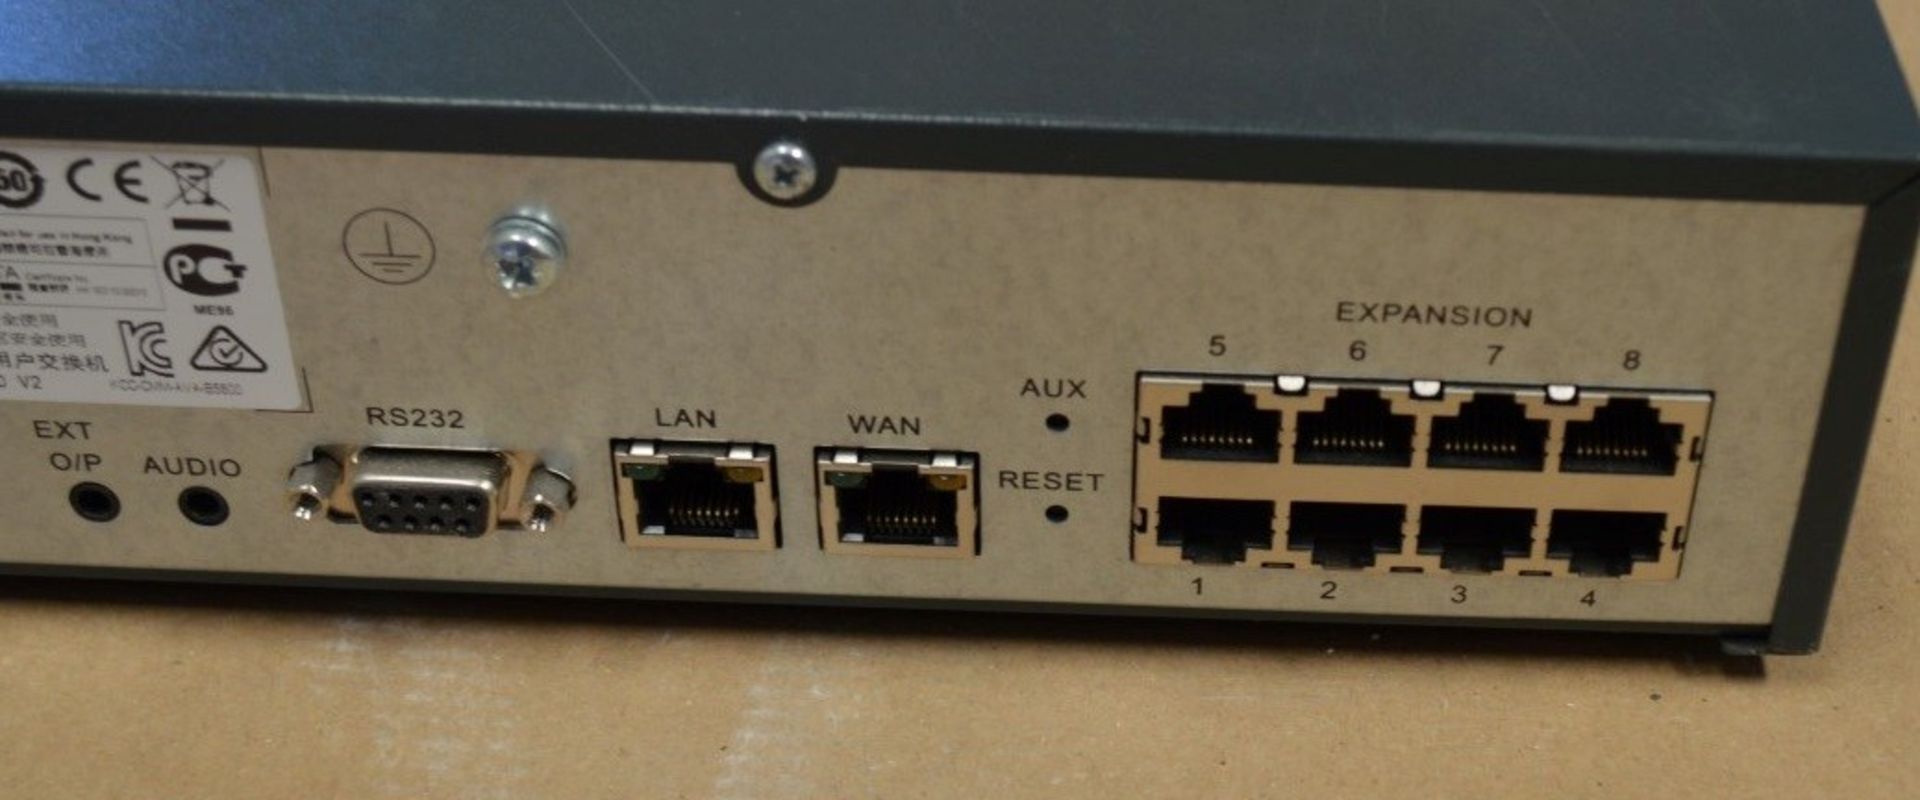 1 x Avaya IP Office 500 V2 Control Unit - Used, From A Working Environment - Ref637 - WH2 - - Image 3 of 5